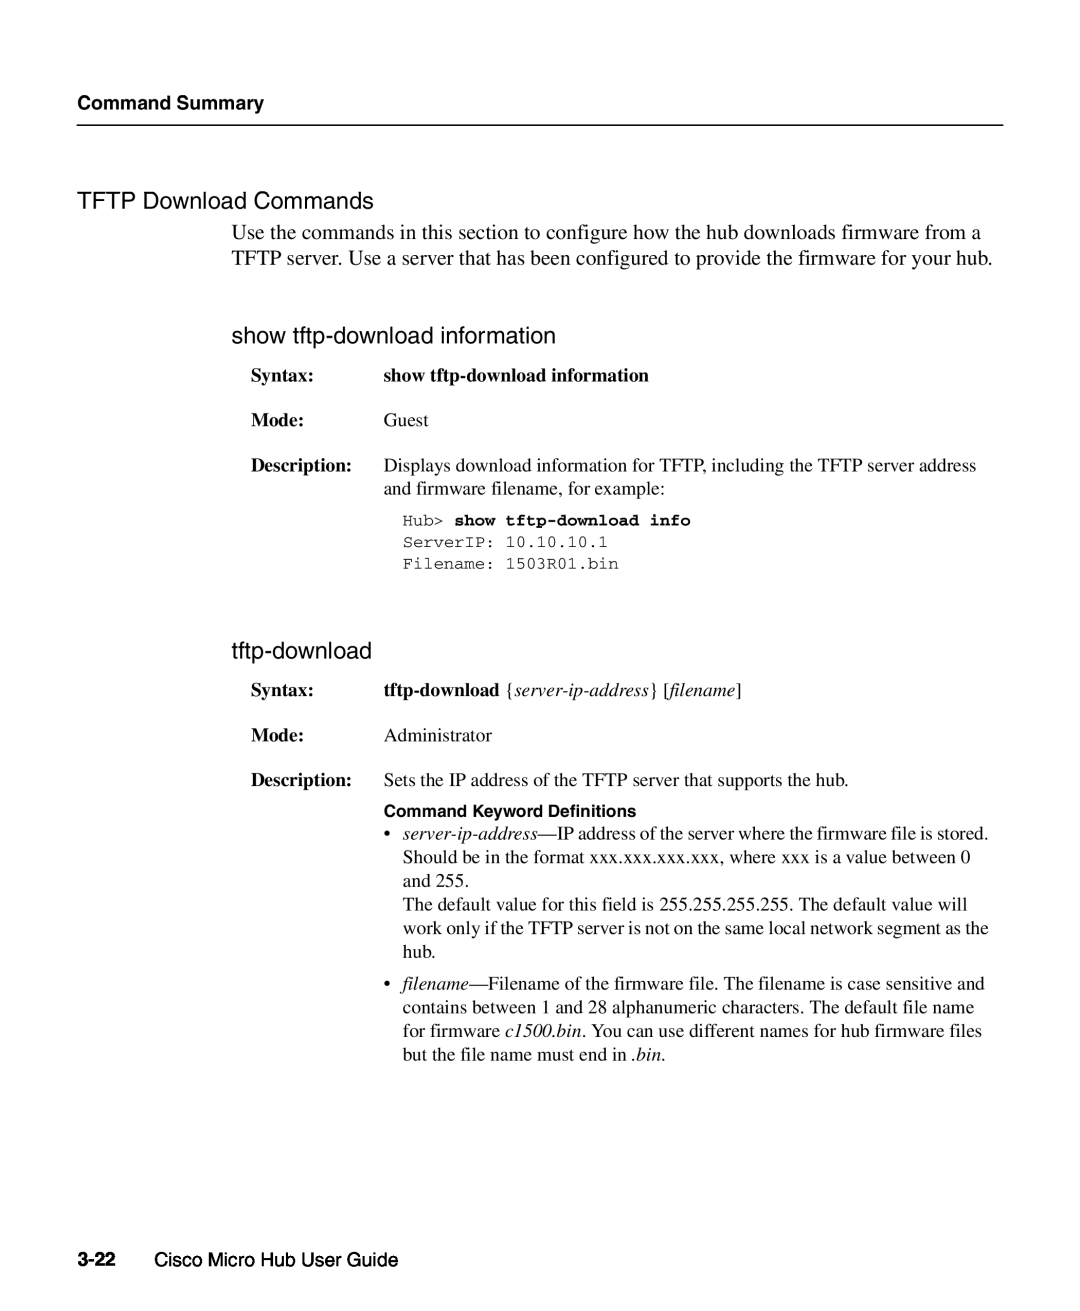 Cisco Systems 1503 manual TFTP Download Commands, show tftp-download information, Command Summary 